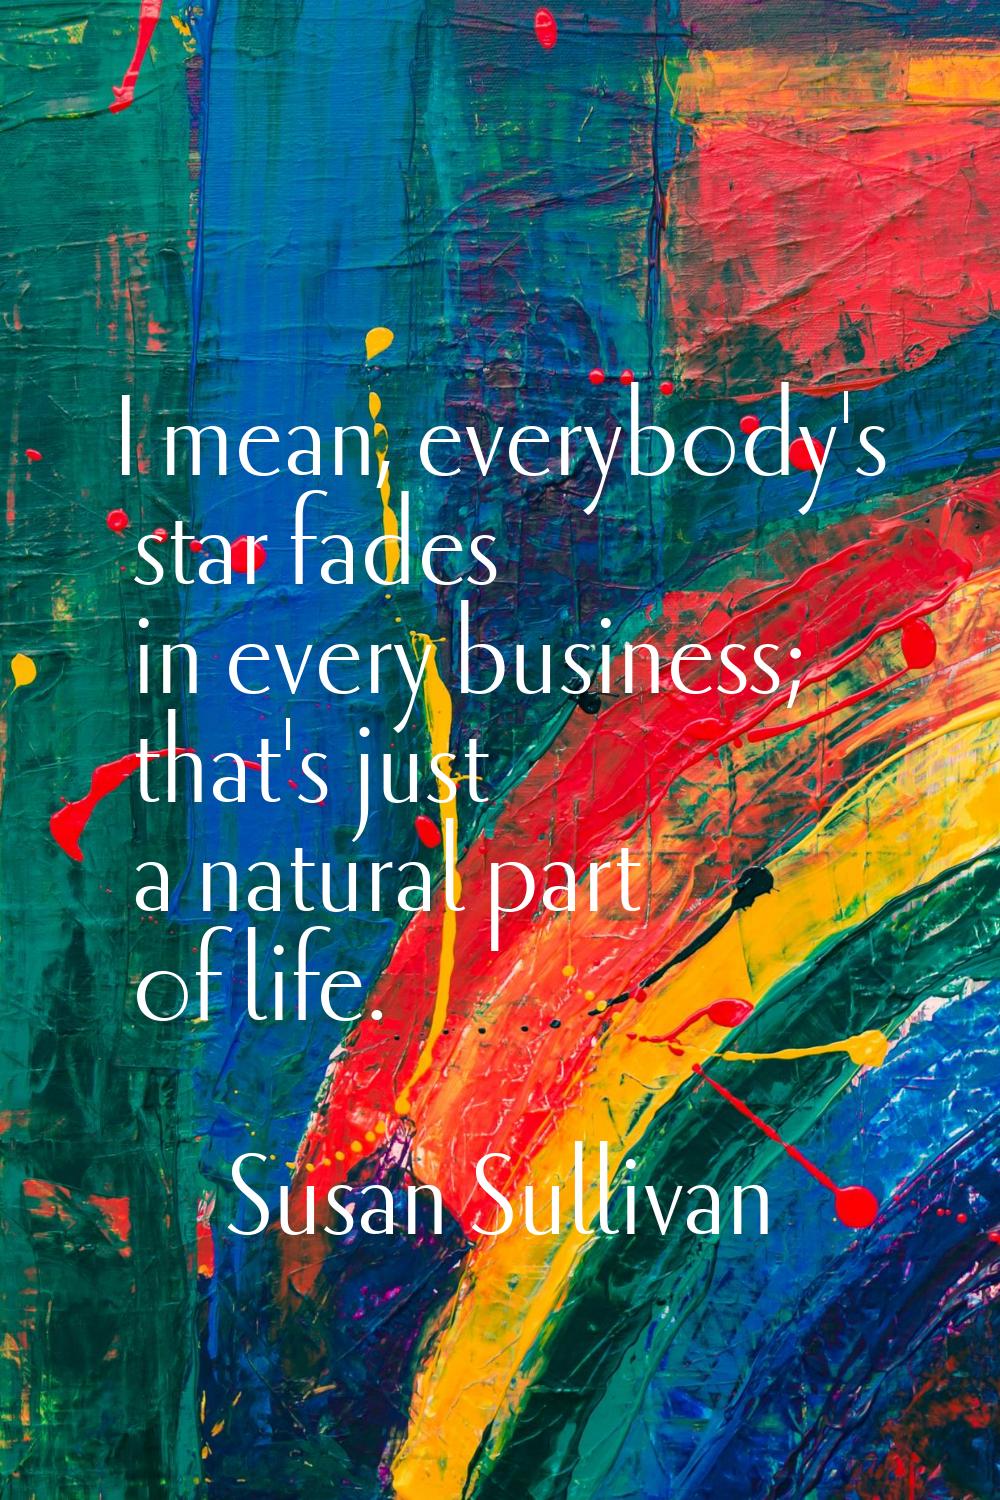 I mean, everybody's star fades in every business; that's just a natural part of life.